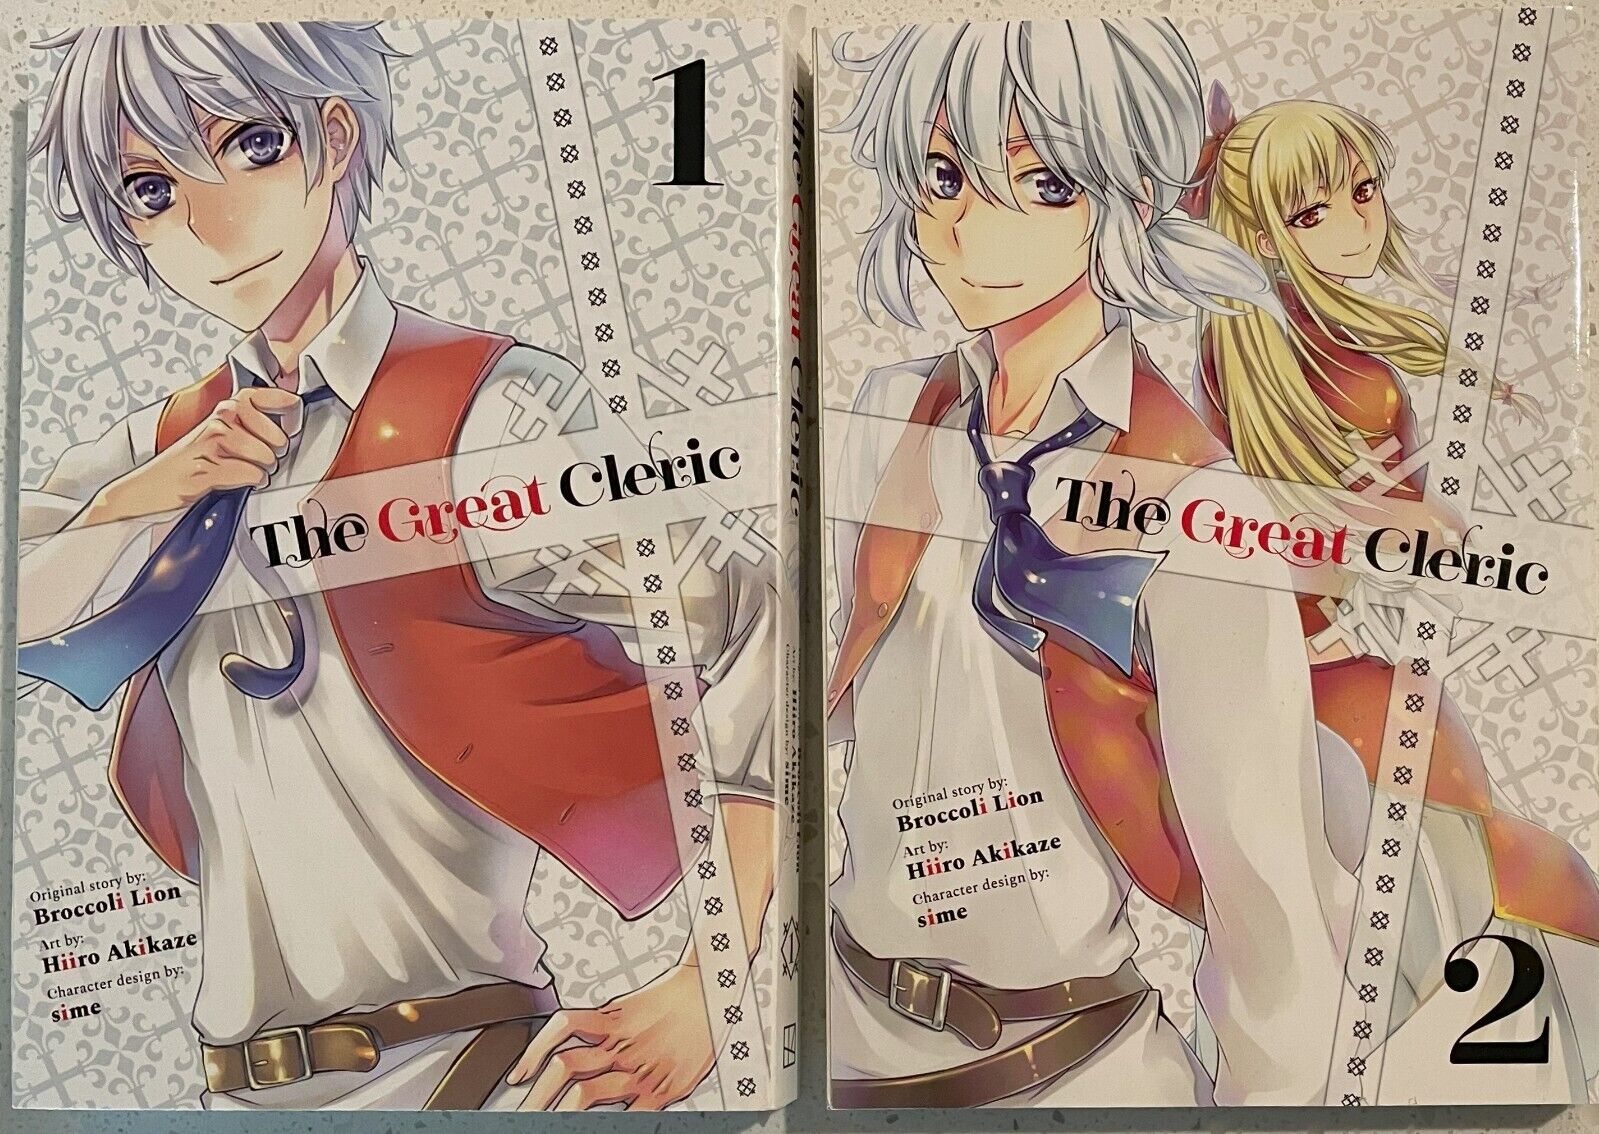 The Great Cleric - 2 volume set lot